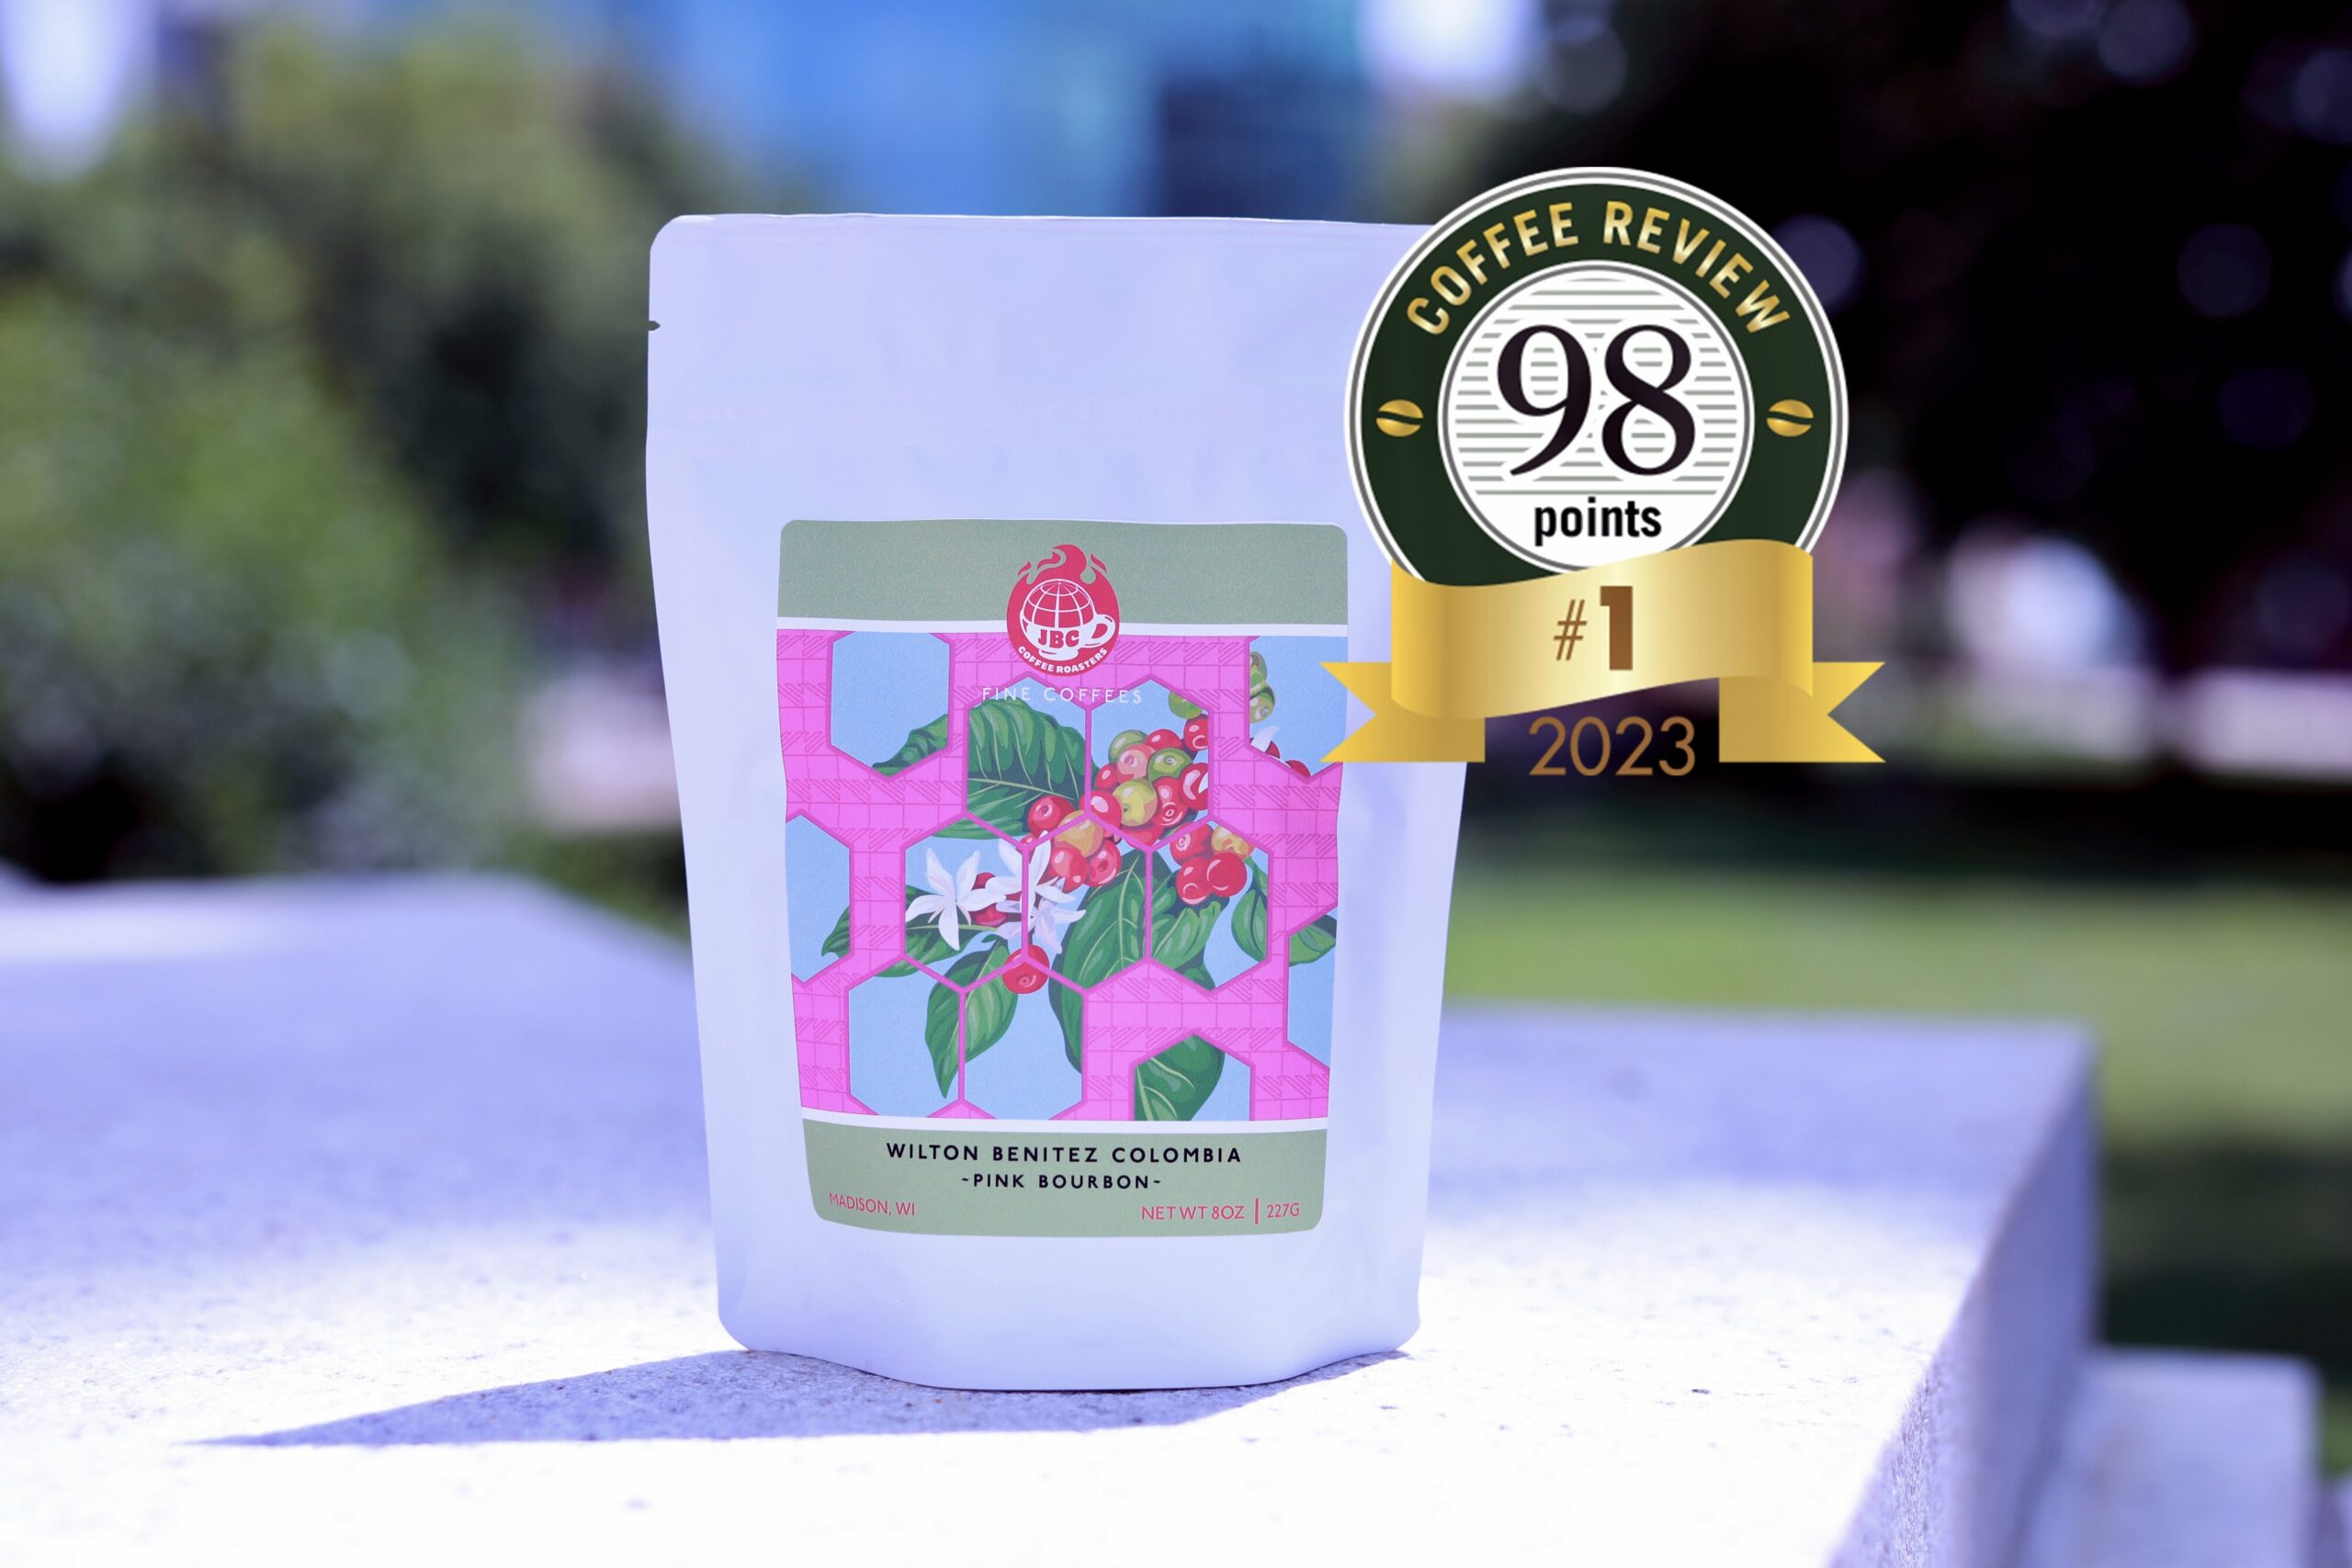 JBC Roaster's Wilton Benitez Pink Bourbon Colombia roast is shown with a rating label of 98 out of 100